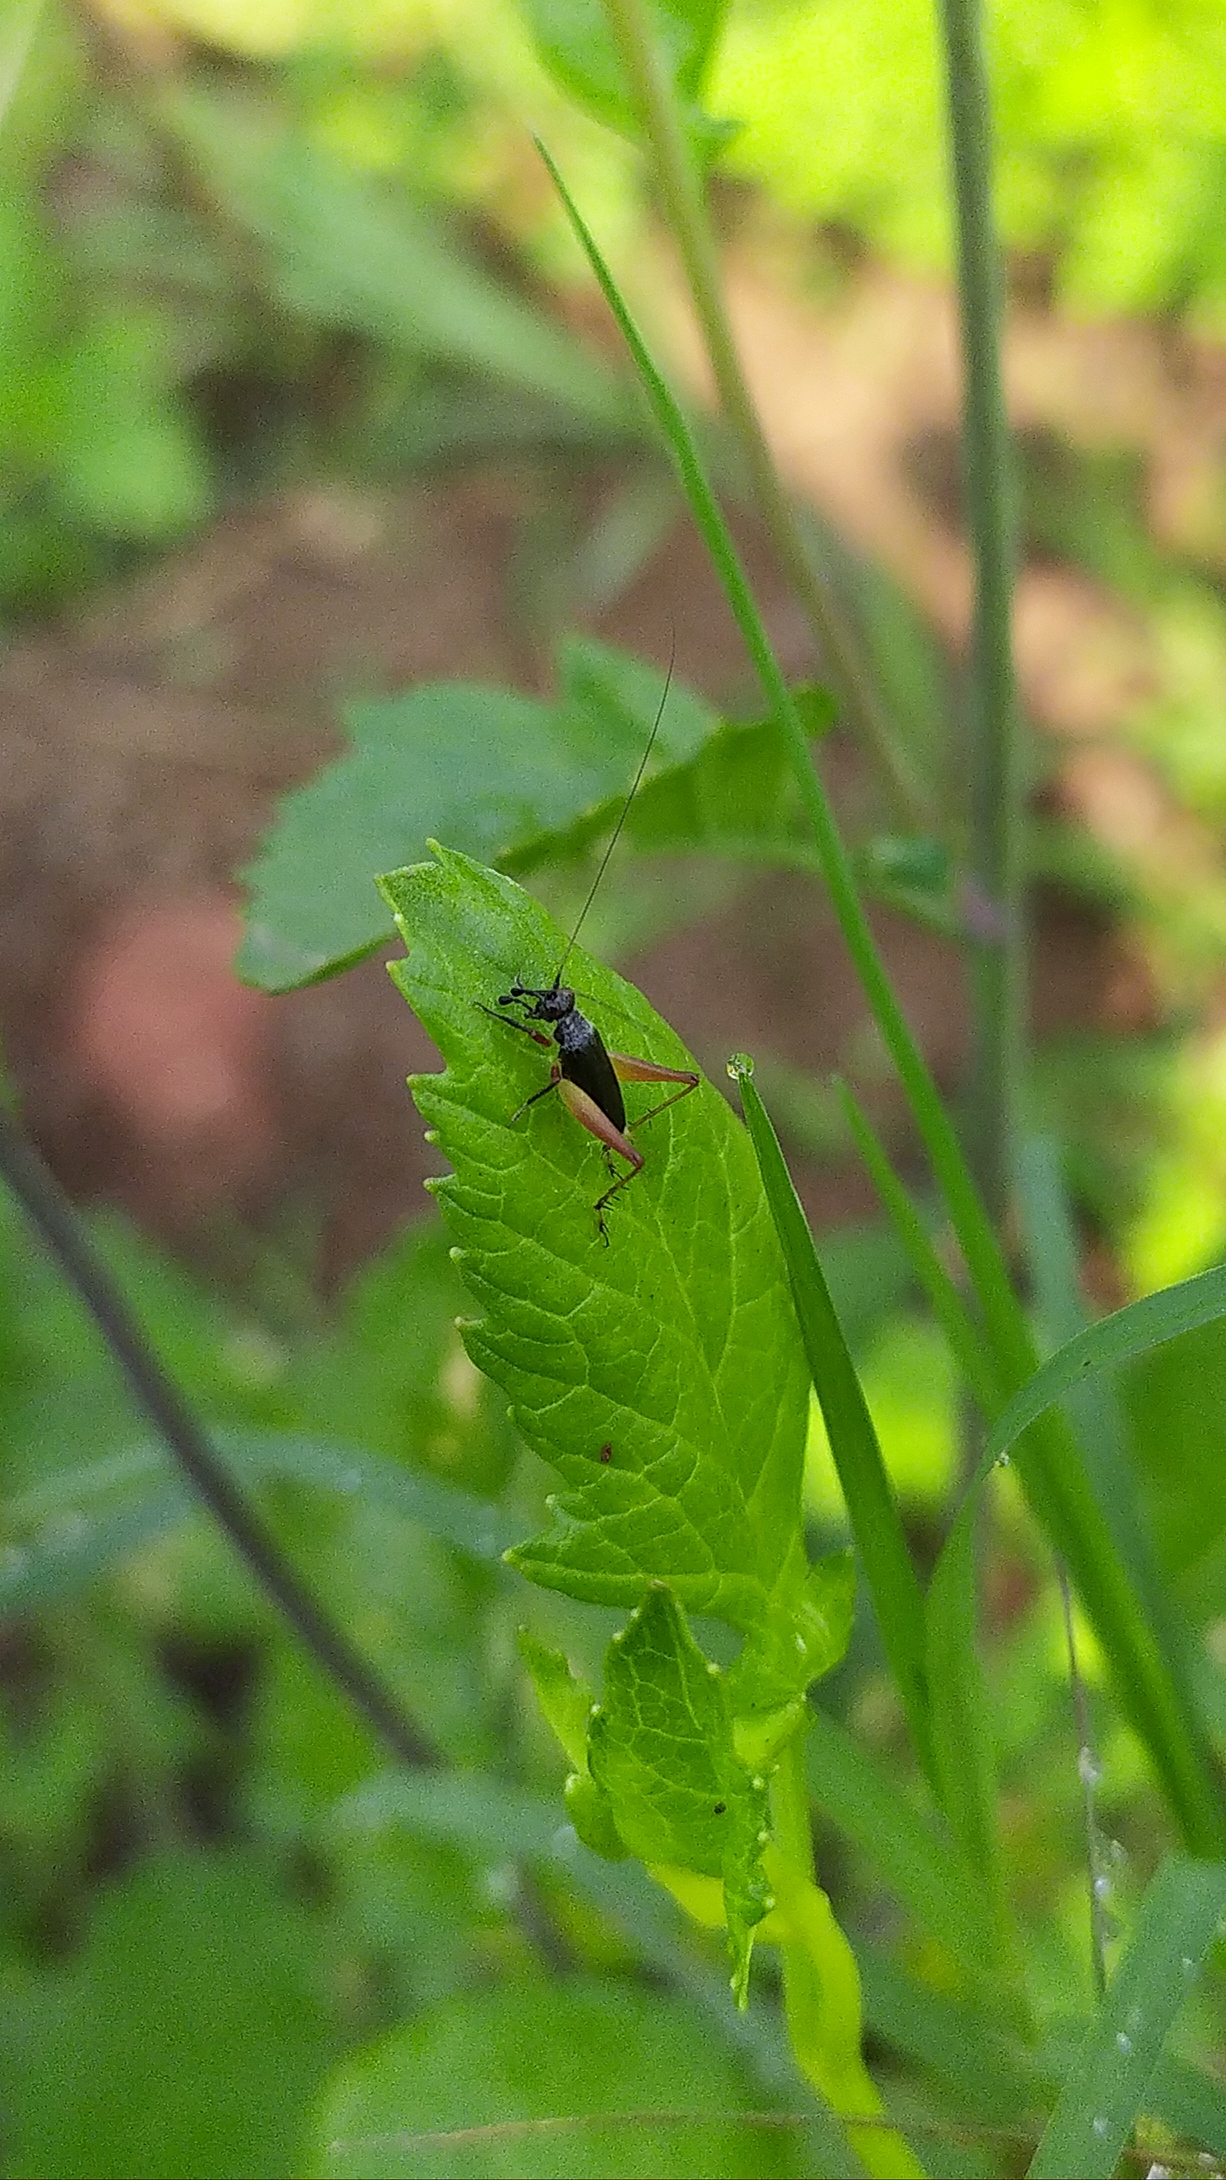 A handsome trig insect on a leaf